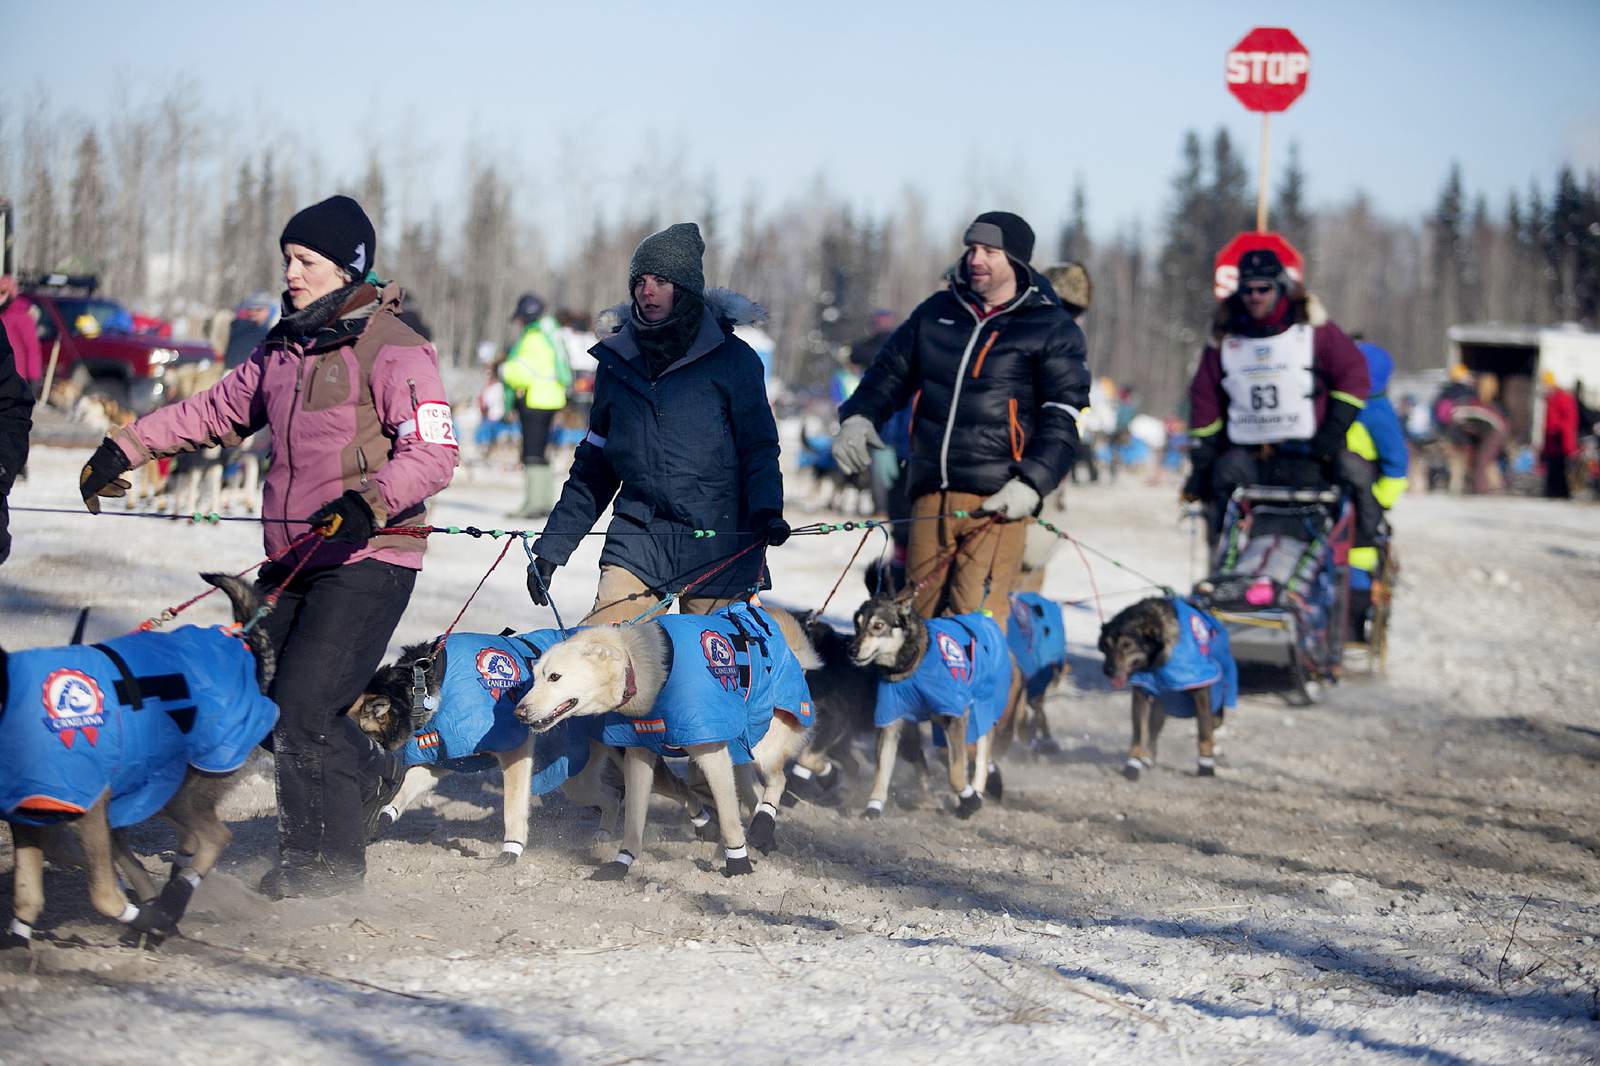 Iditarod preps for any scenario as 2021 race plans proceed